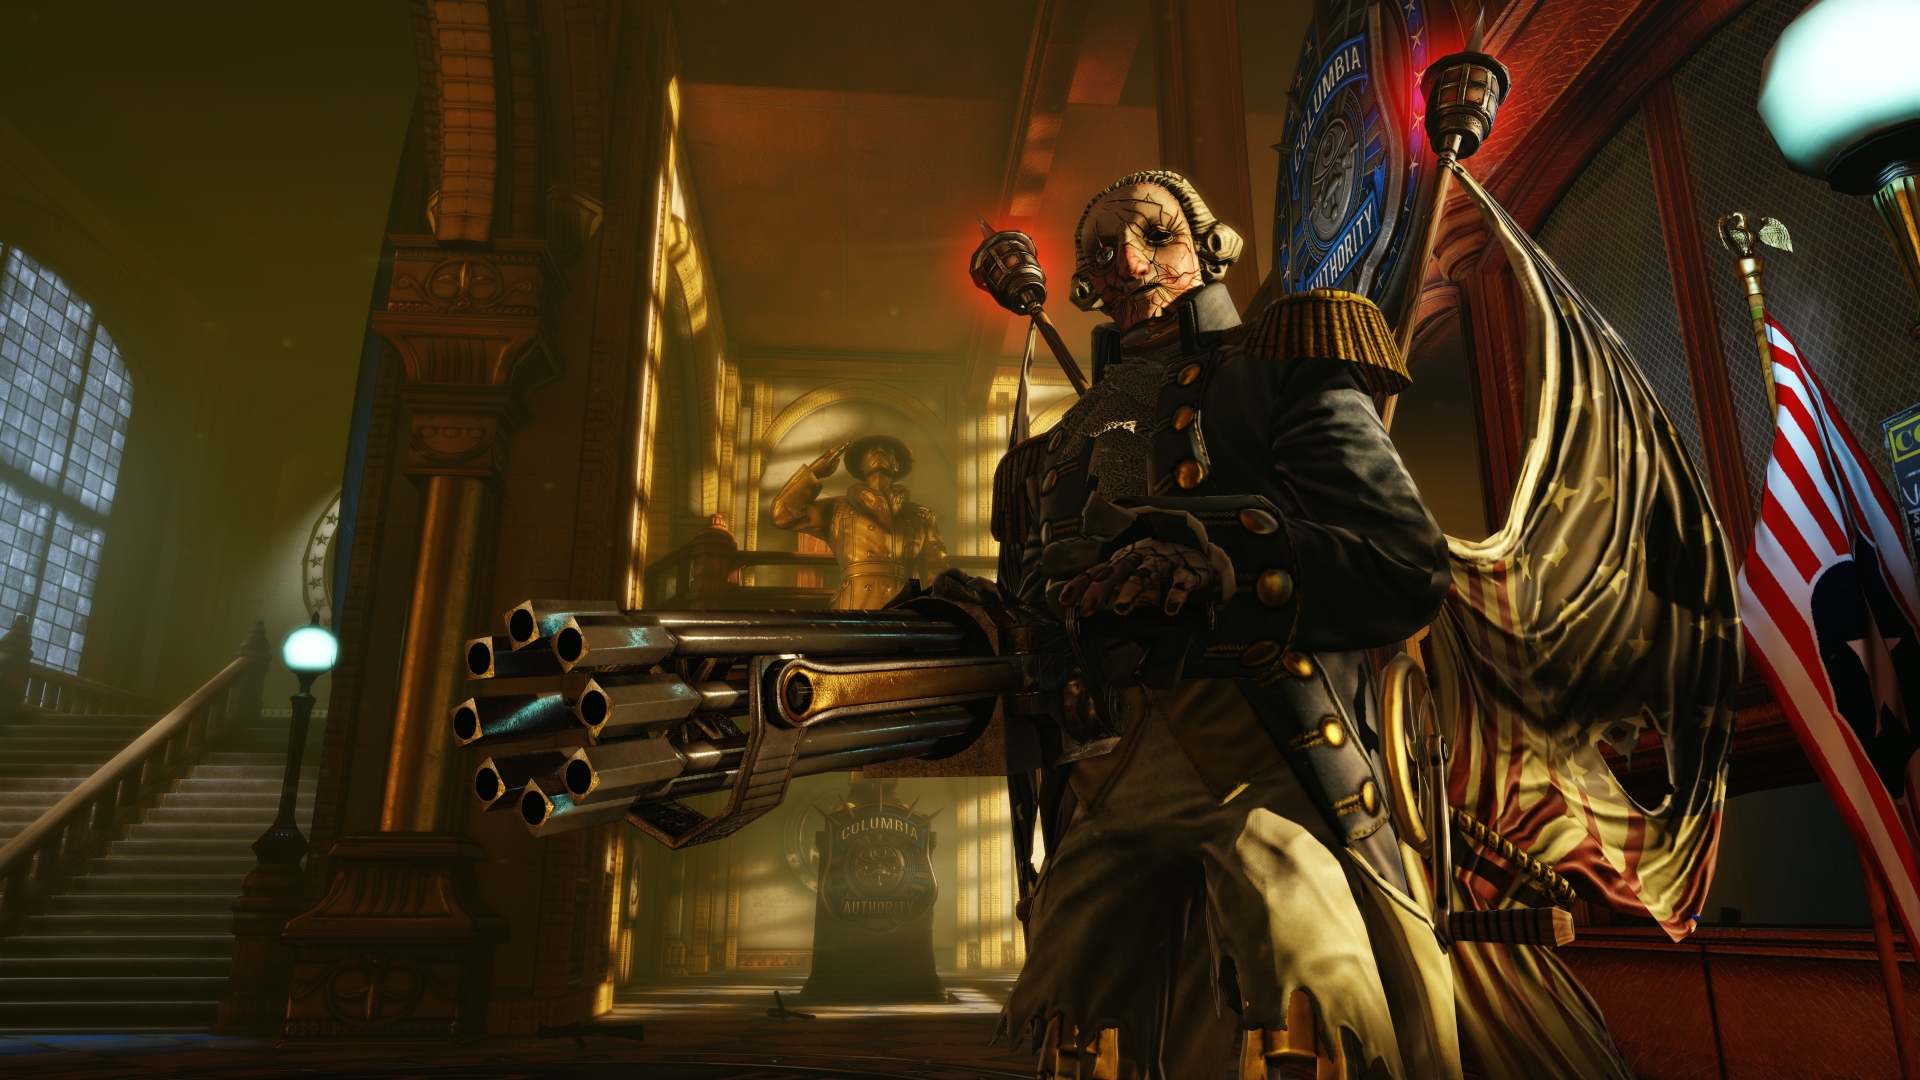 Media asset in full size related to 3dfxzone.it news item entitled as follows: BioShock Infinite diviene gold: on line nuovi screenshots e trailer | Image Name: news18986_BioShock-Infinite_screenshot_1.jpg